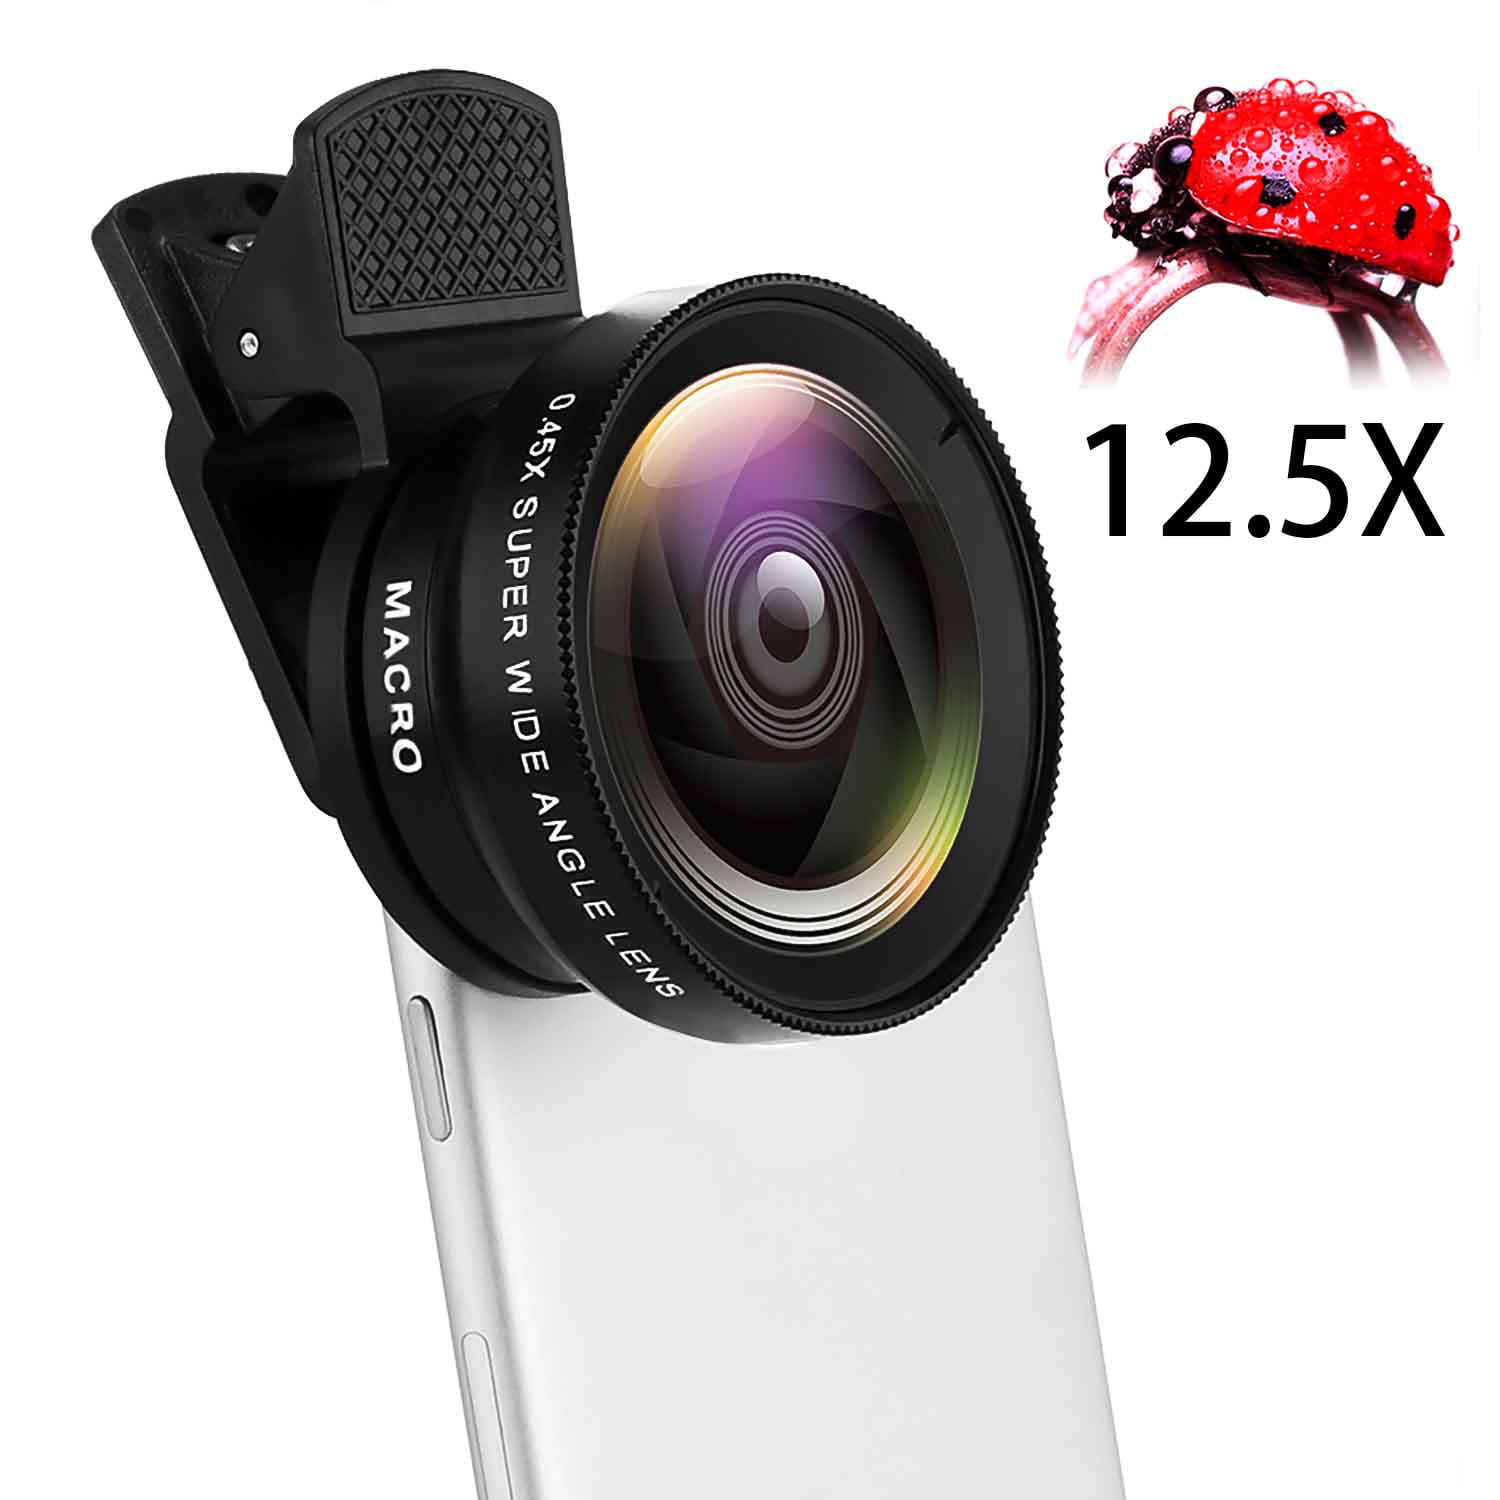 More Beautiful Pictures With the iPhone lens 0.45X 140° Wide Angle Lens 12.5X Macro Lens Hvspring smartphone Optical glass Camera lens kit for iPhone 8/7/6 Plus Samsung and Most of Smartphone 2in1